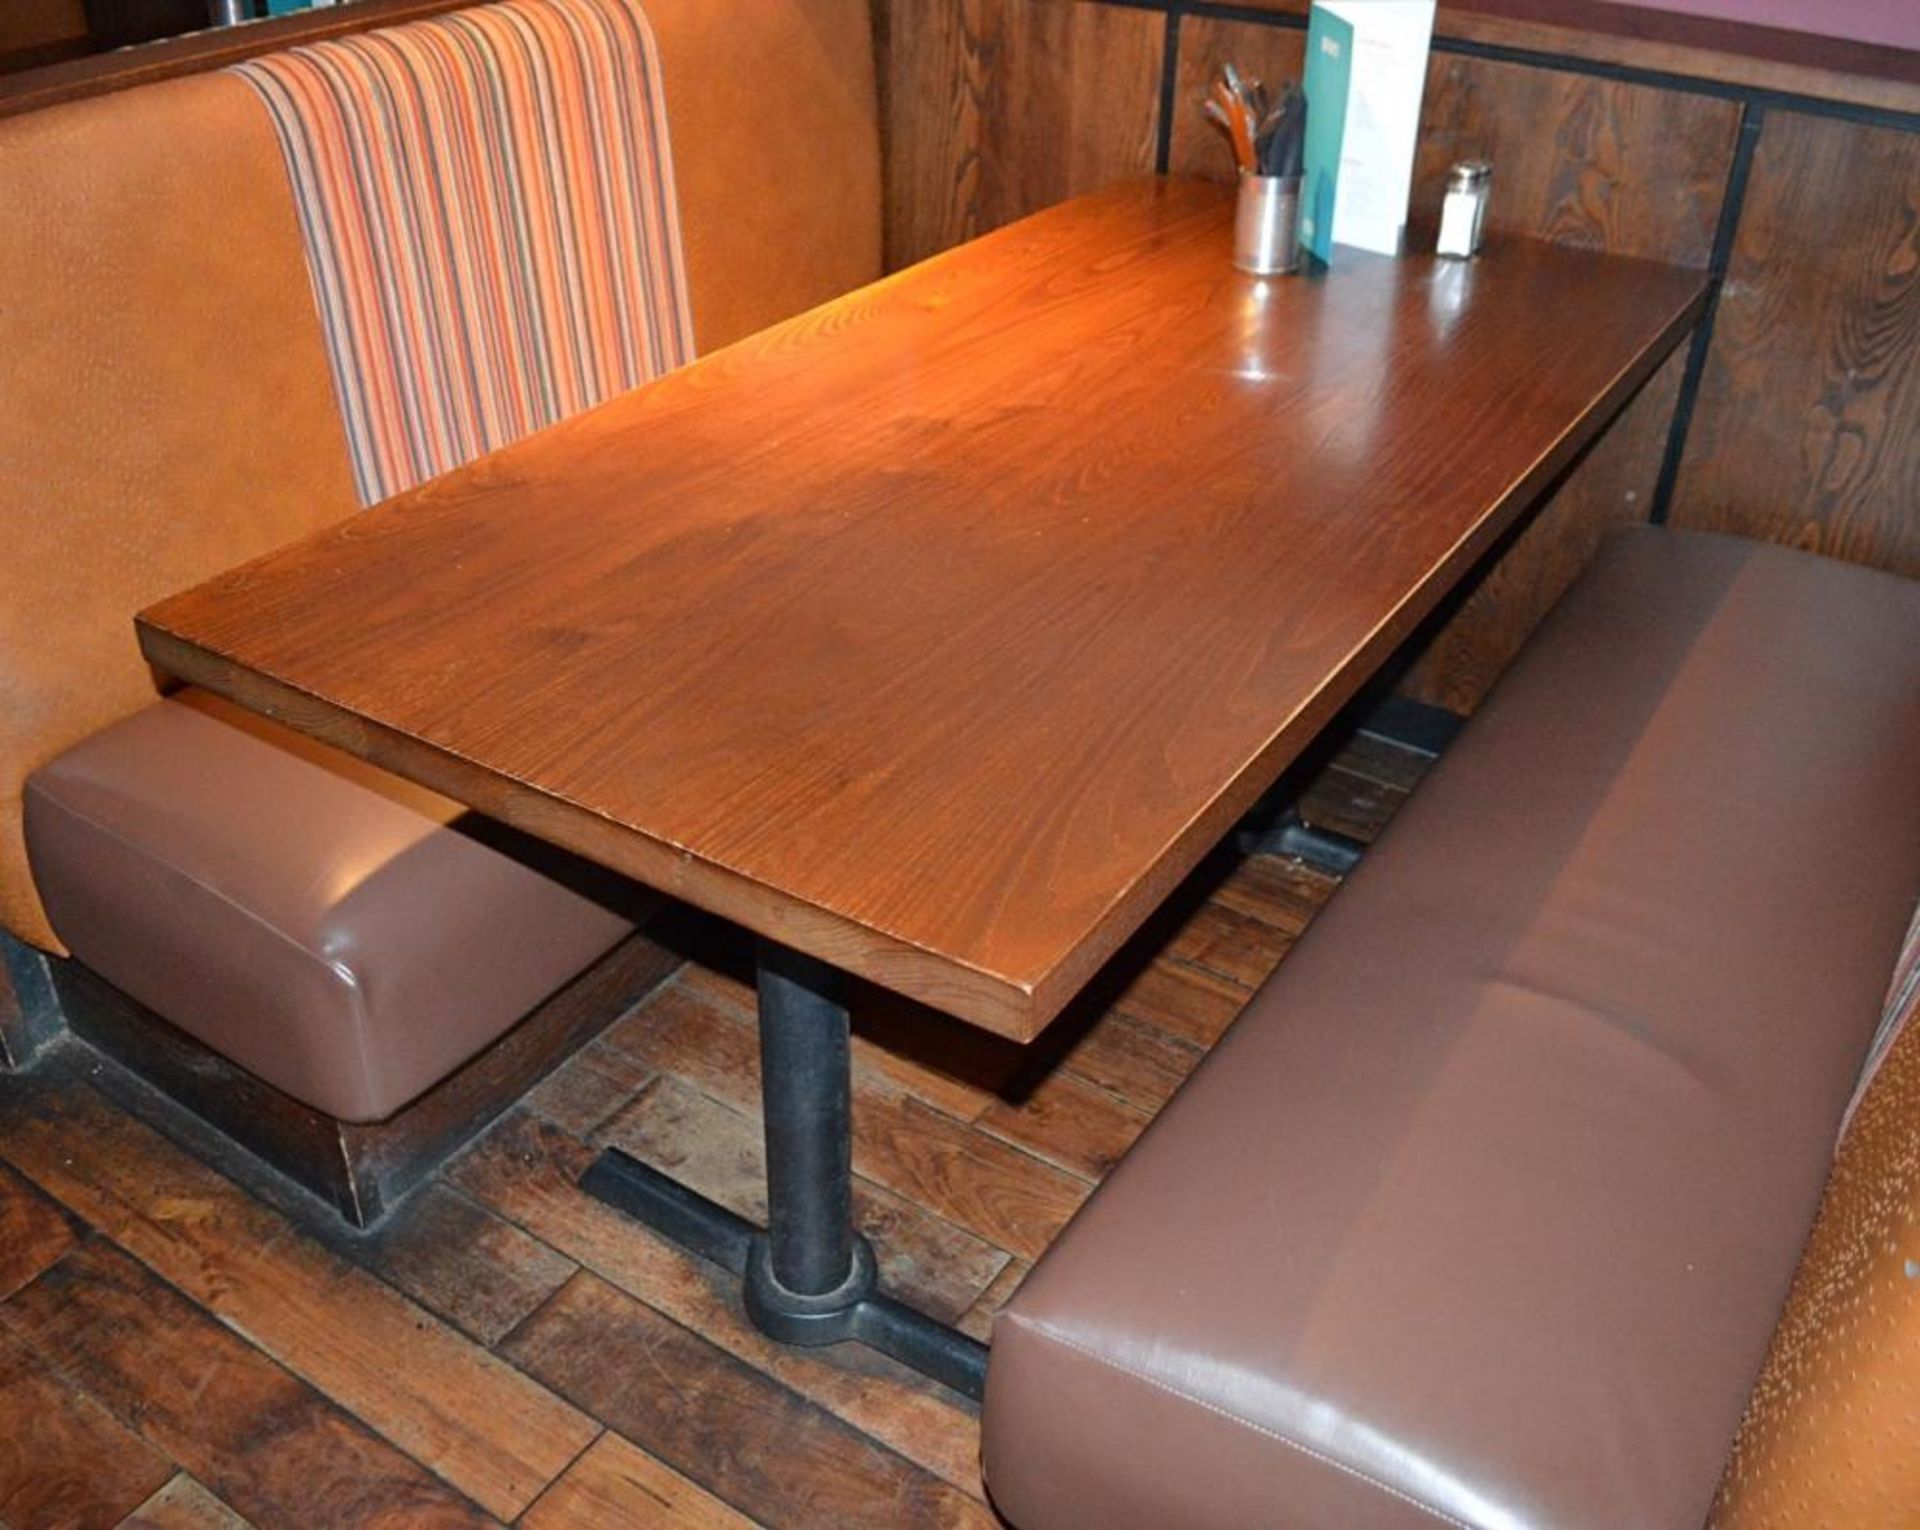 5 x Large Wooden Topped Rectangular Bistro Tables With Metal Bases - Dimensions: H75 x W155 x D75cm